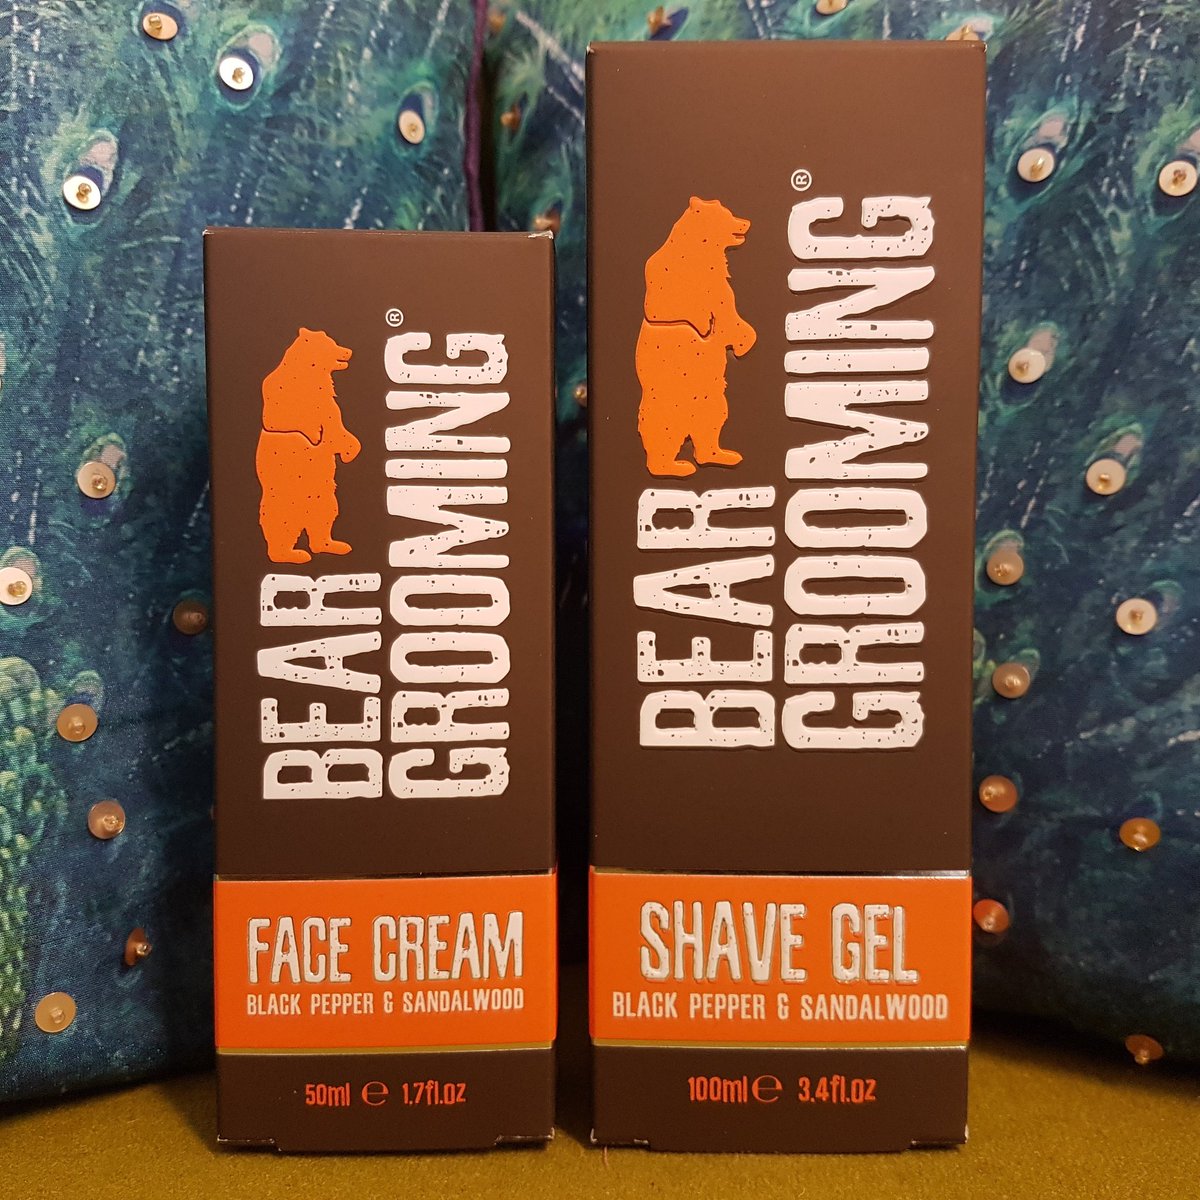 We're super excited to announce that our #newproducts will be available soon! #mensgrooming #shaving #mensskincare #facecream #menstuff #mensstyle